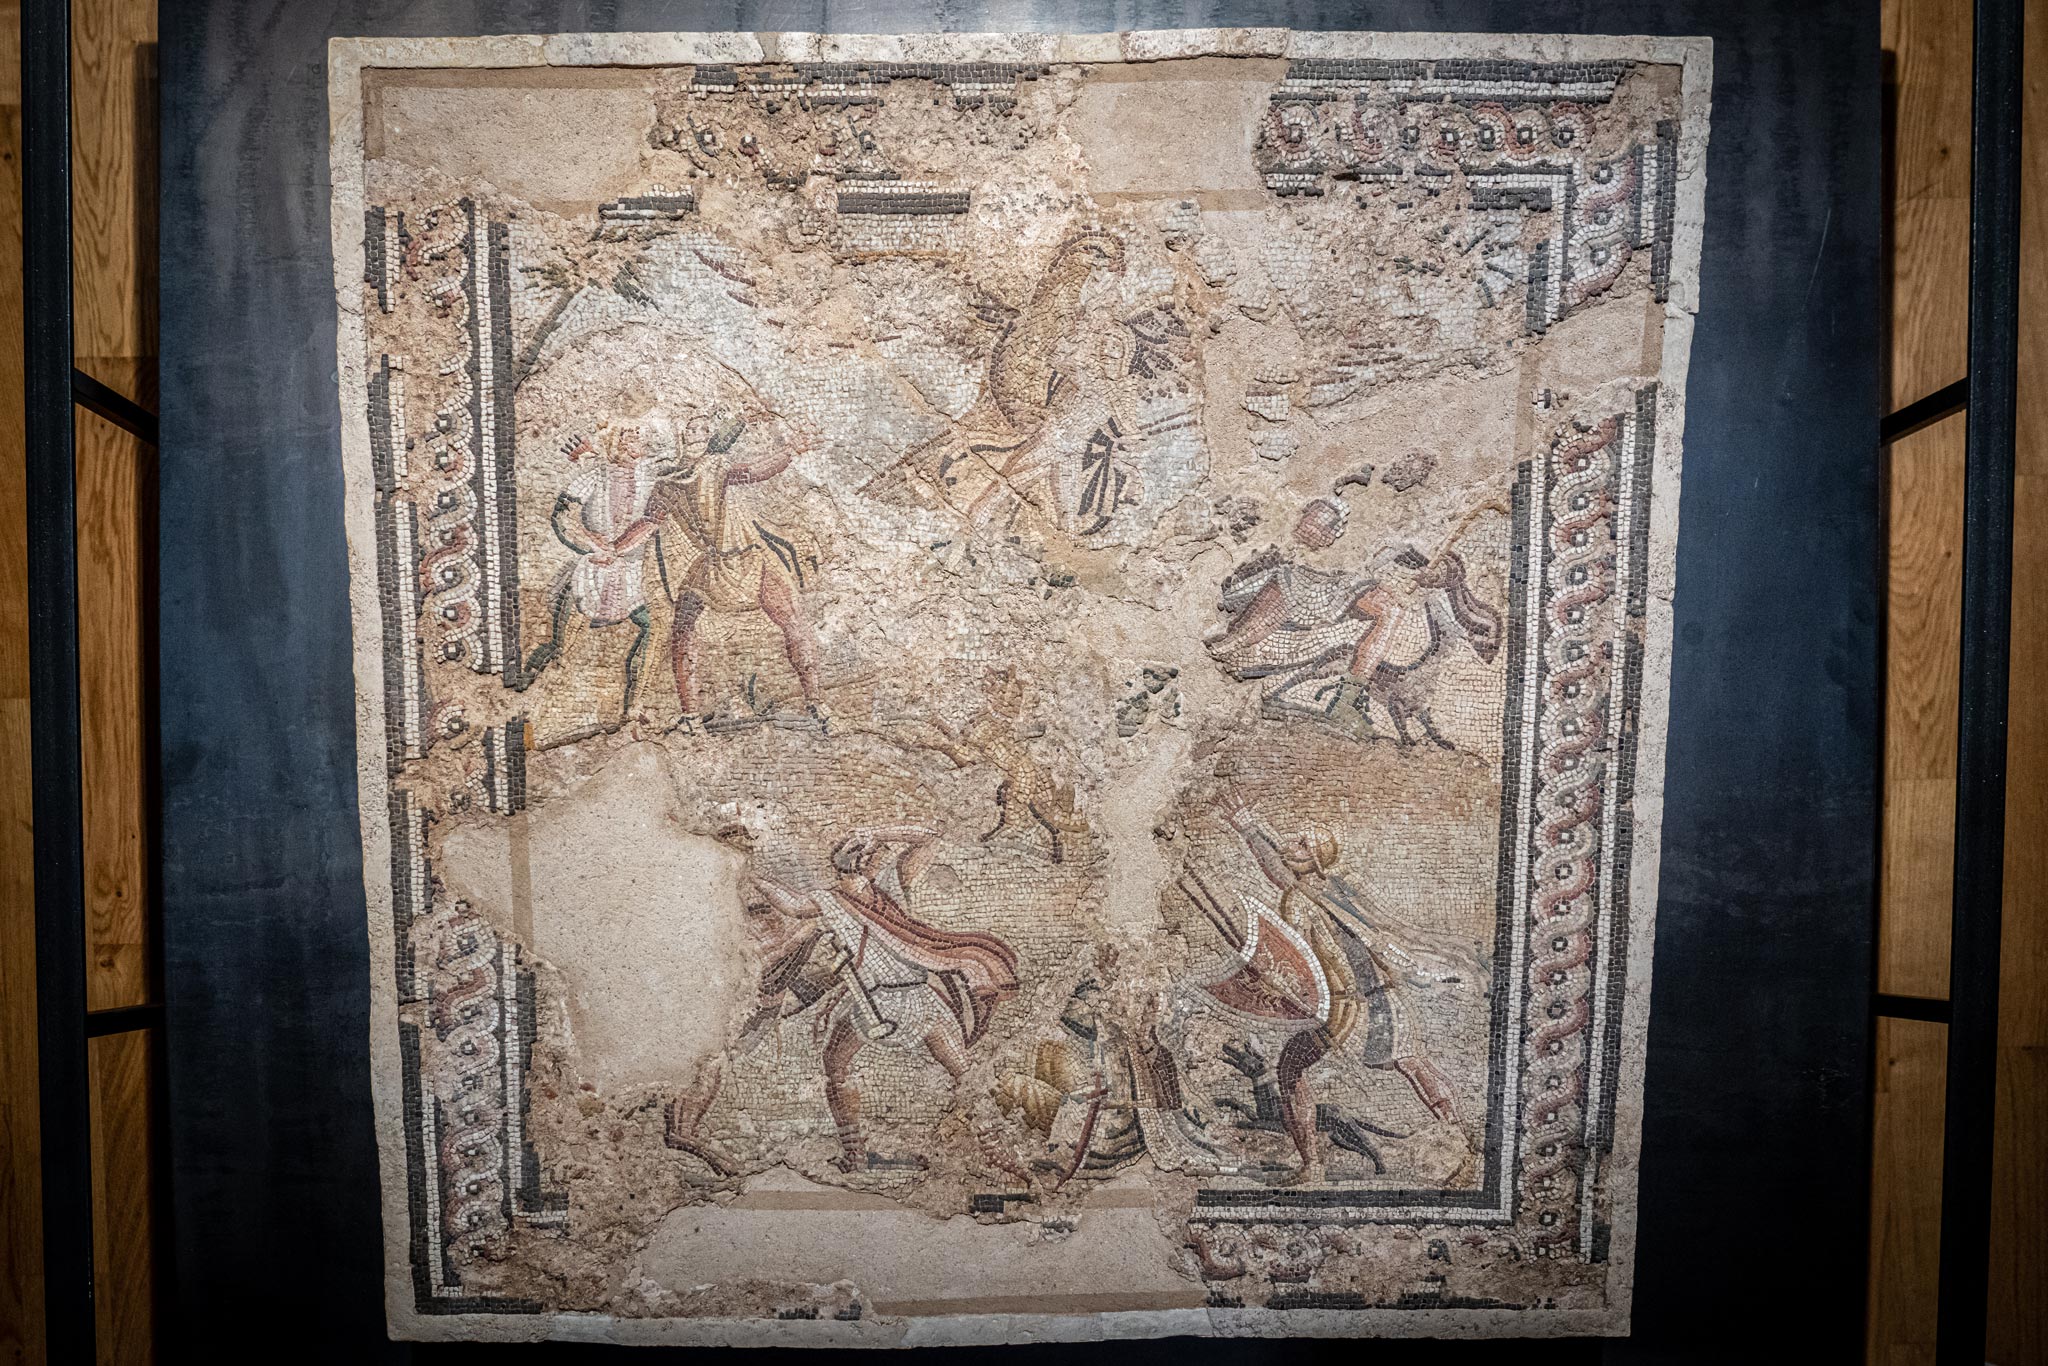 Roman mosaics in Priverno, a town to visit near Rome